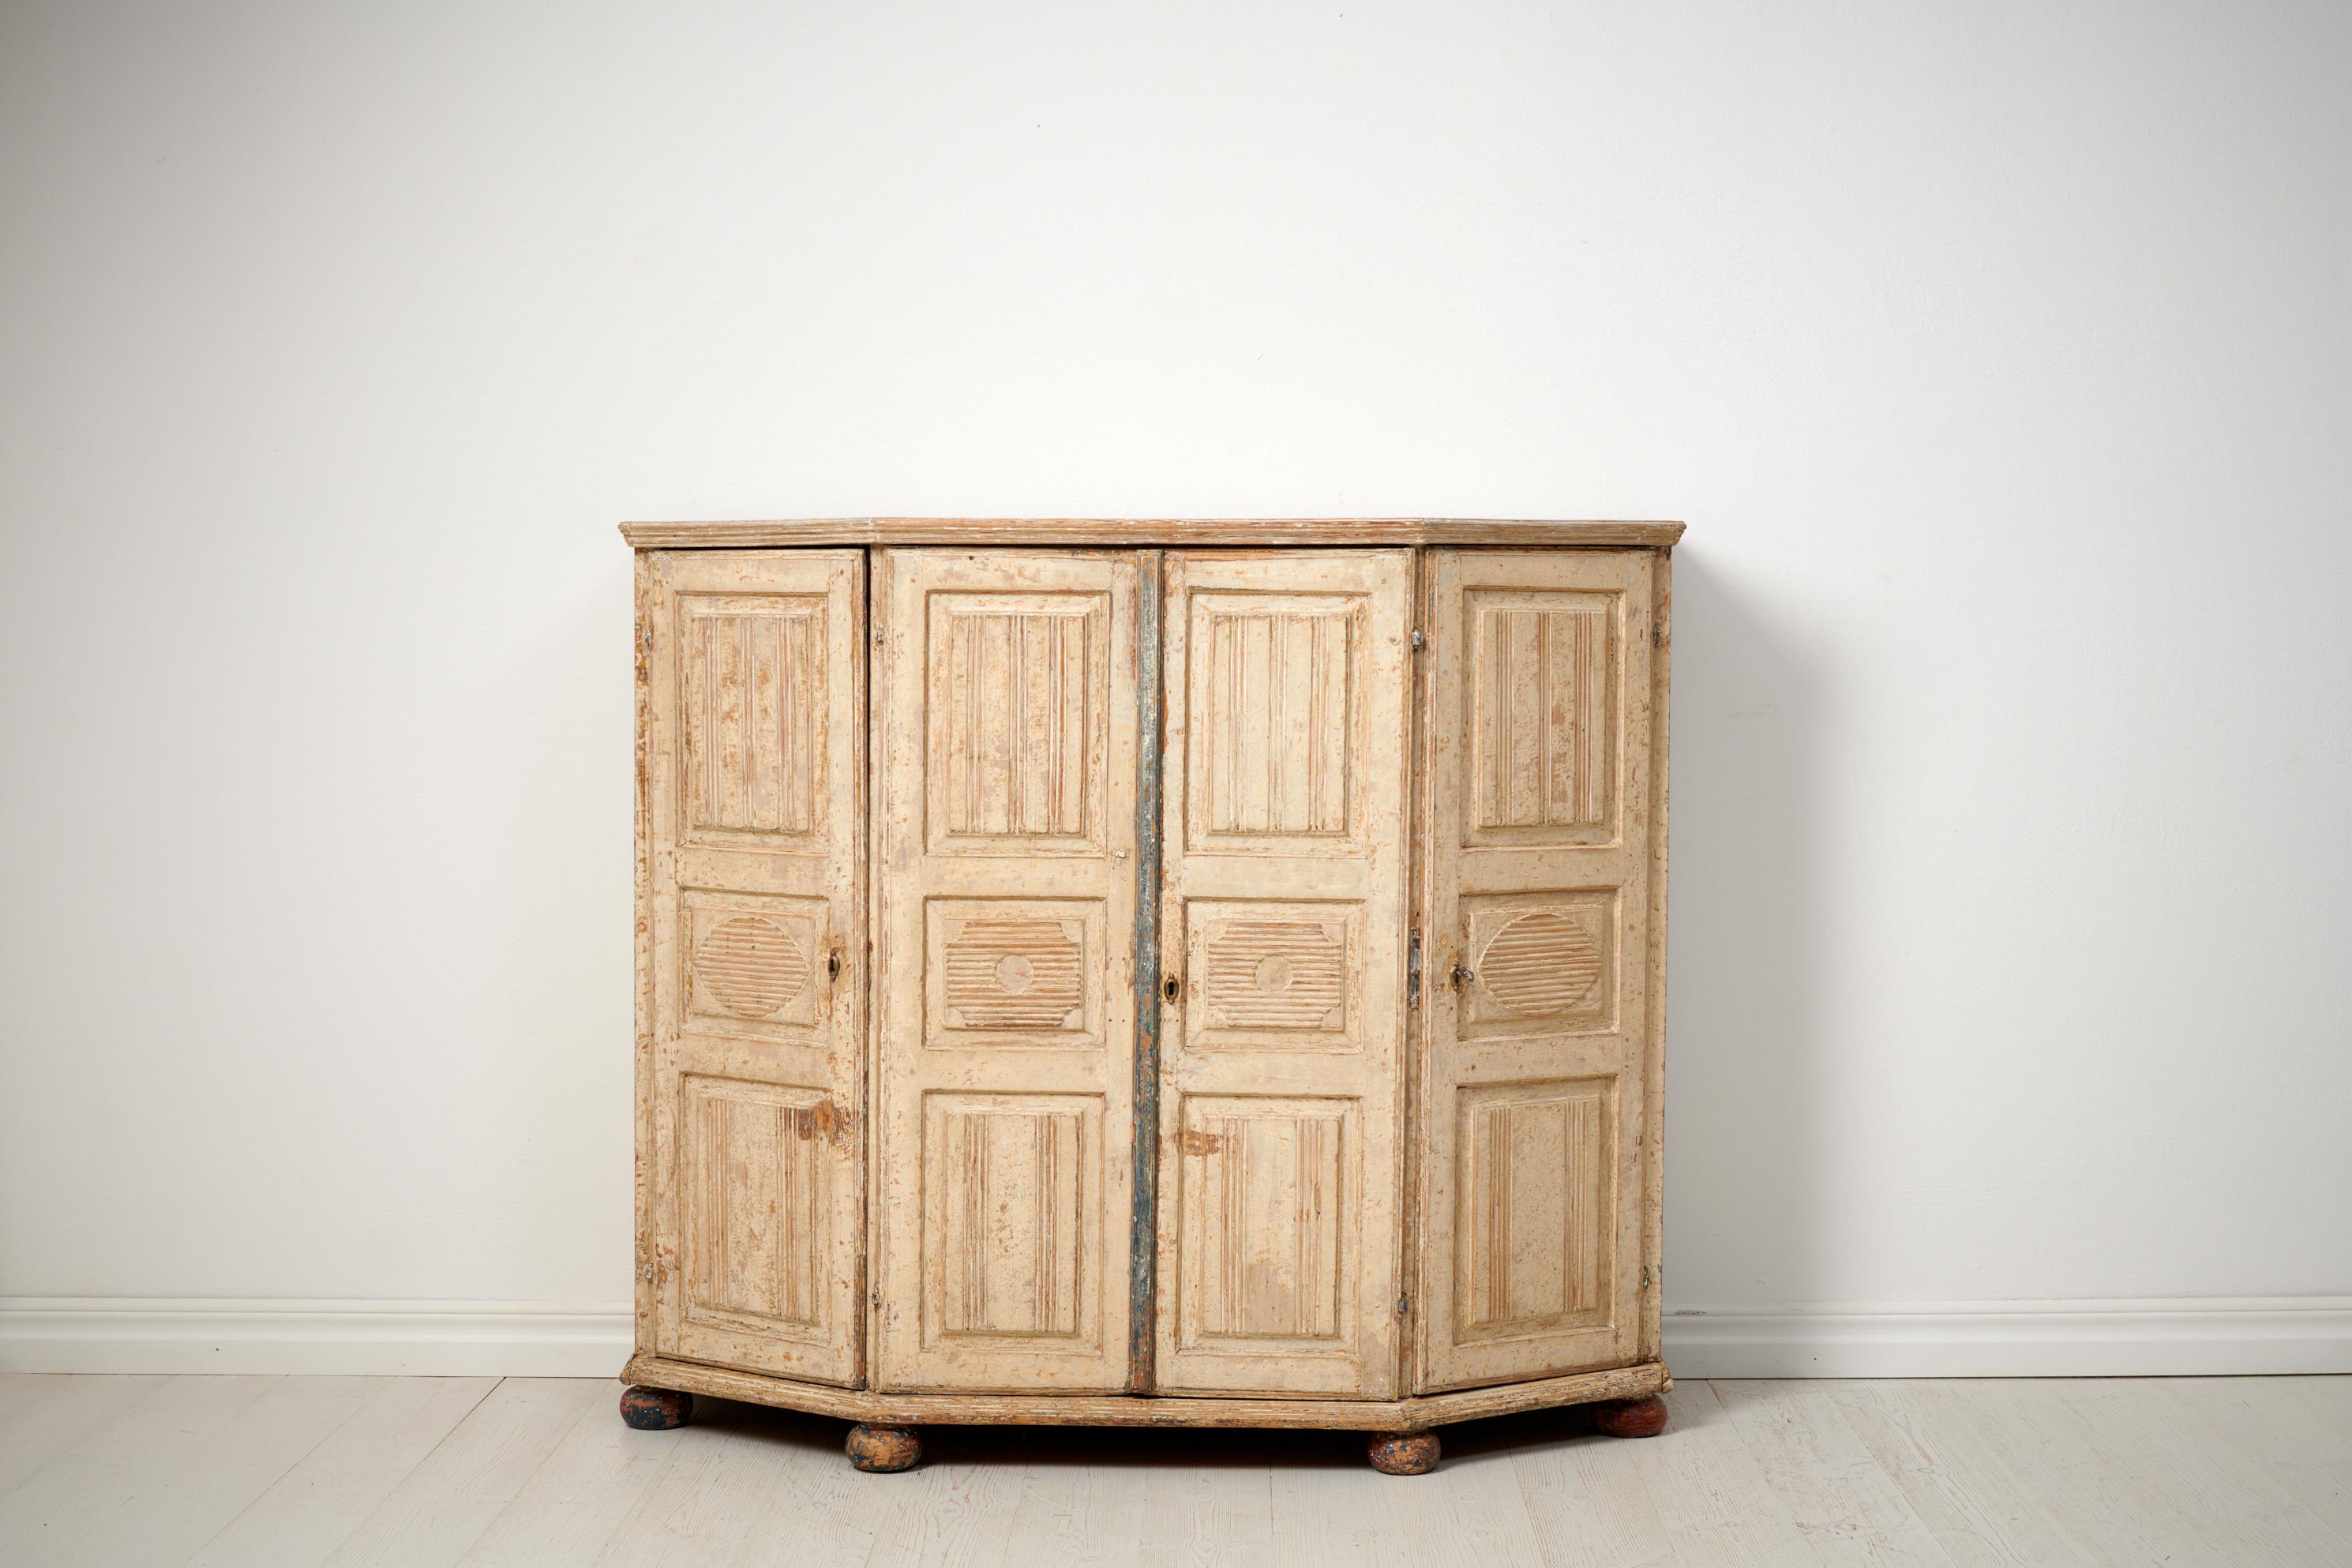 Antique genuine Swedish sideboard in gustavian style. The sideboard is a country house furniture made by hand in solid pine in northern Sweden around 1820. With carved wooden panels on the doors. The sideboard is brought to original paint from the